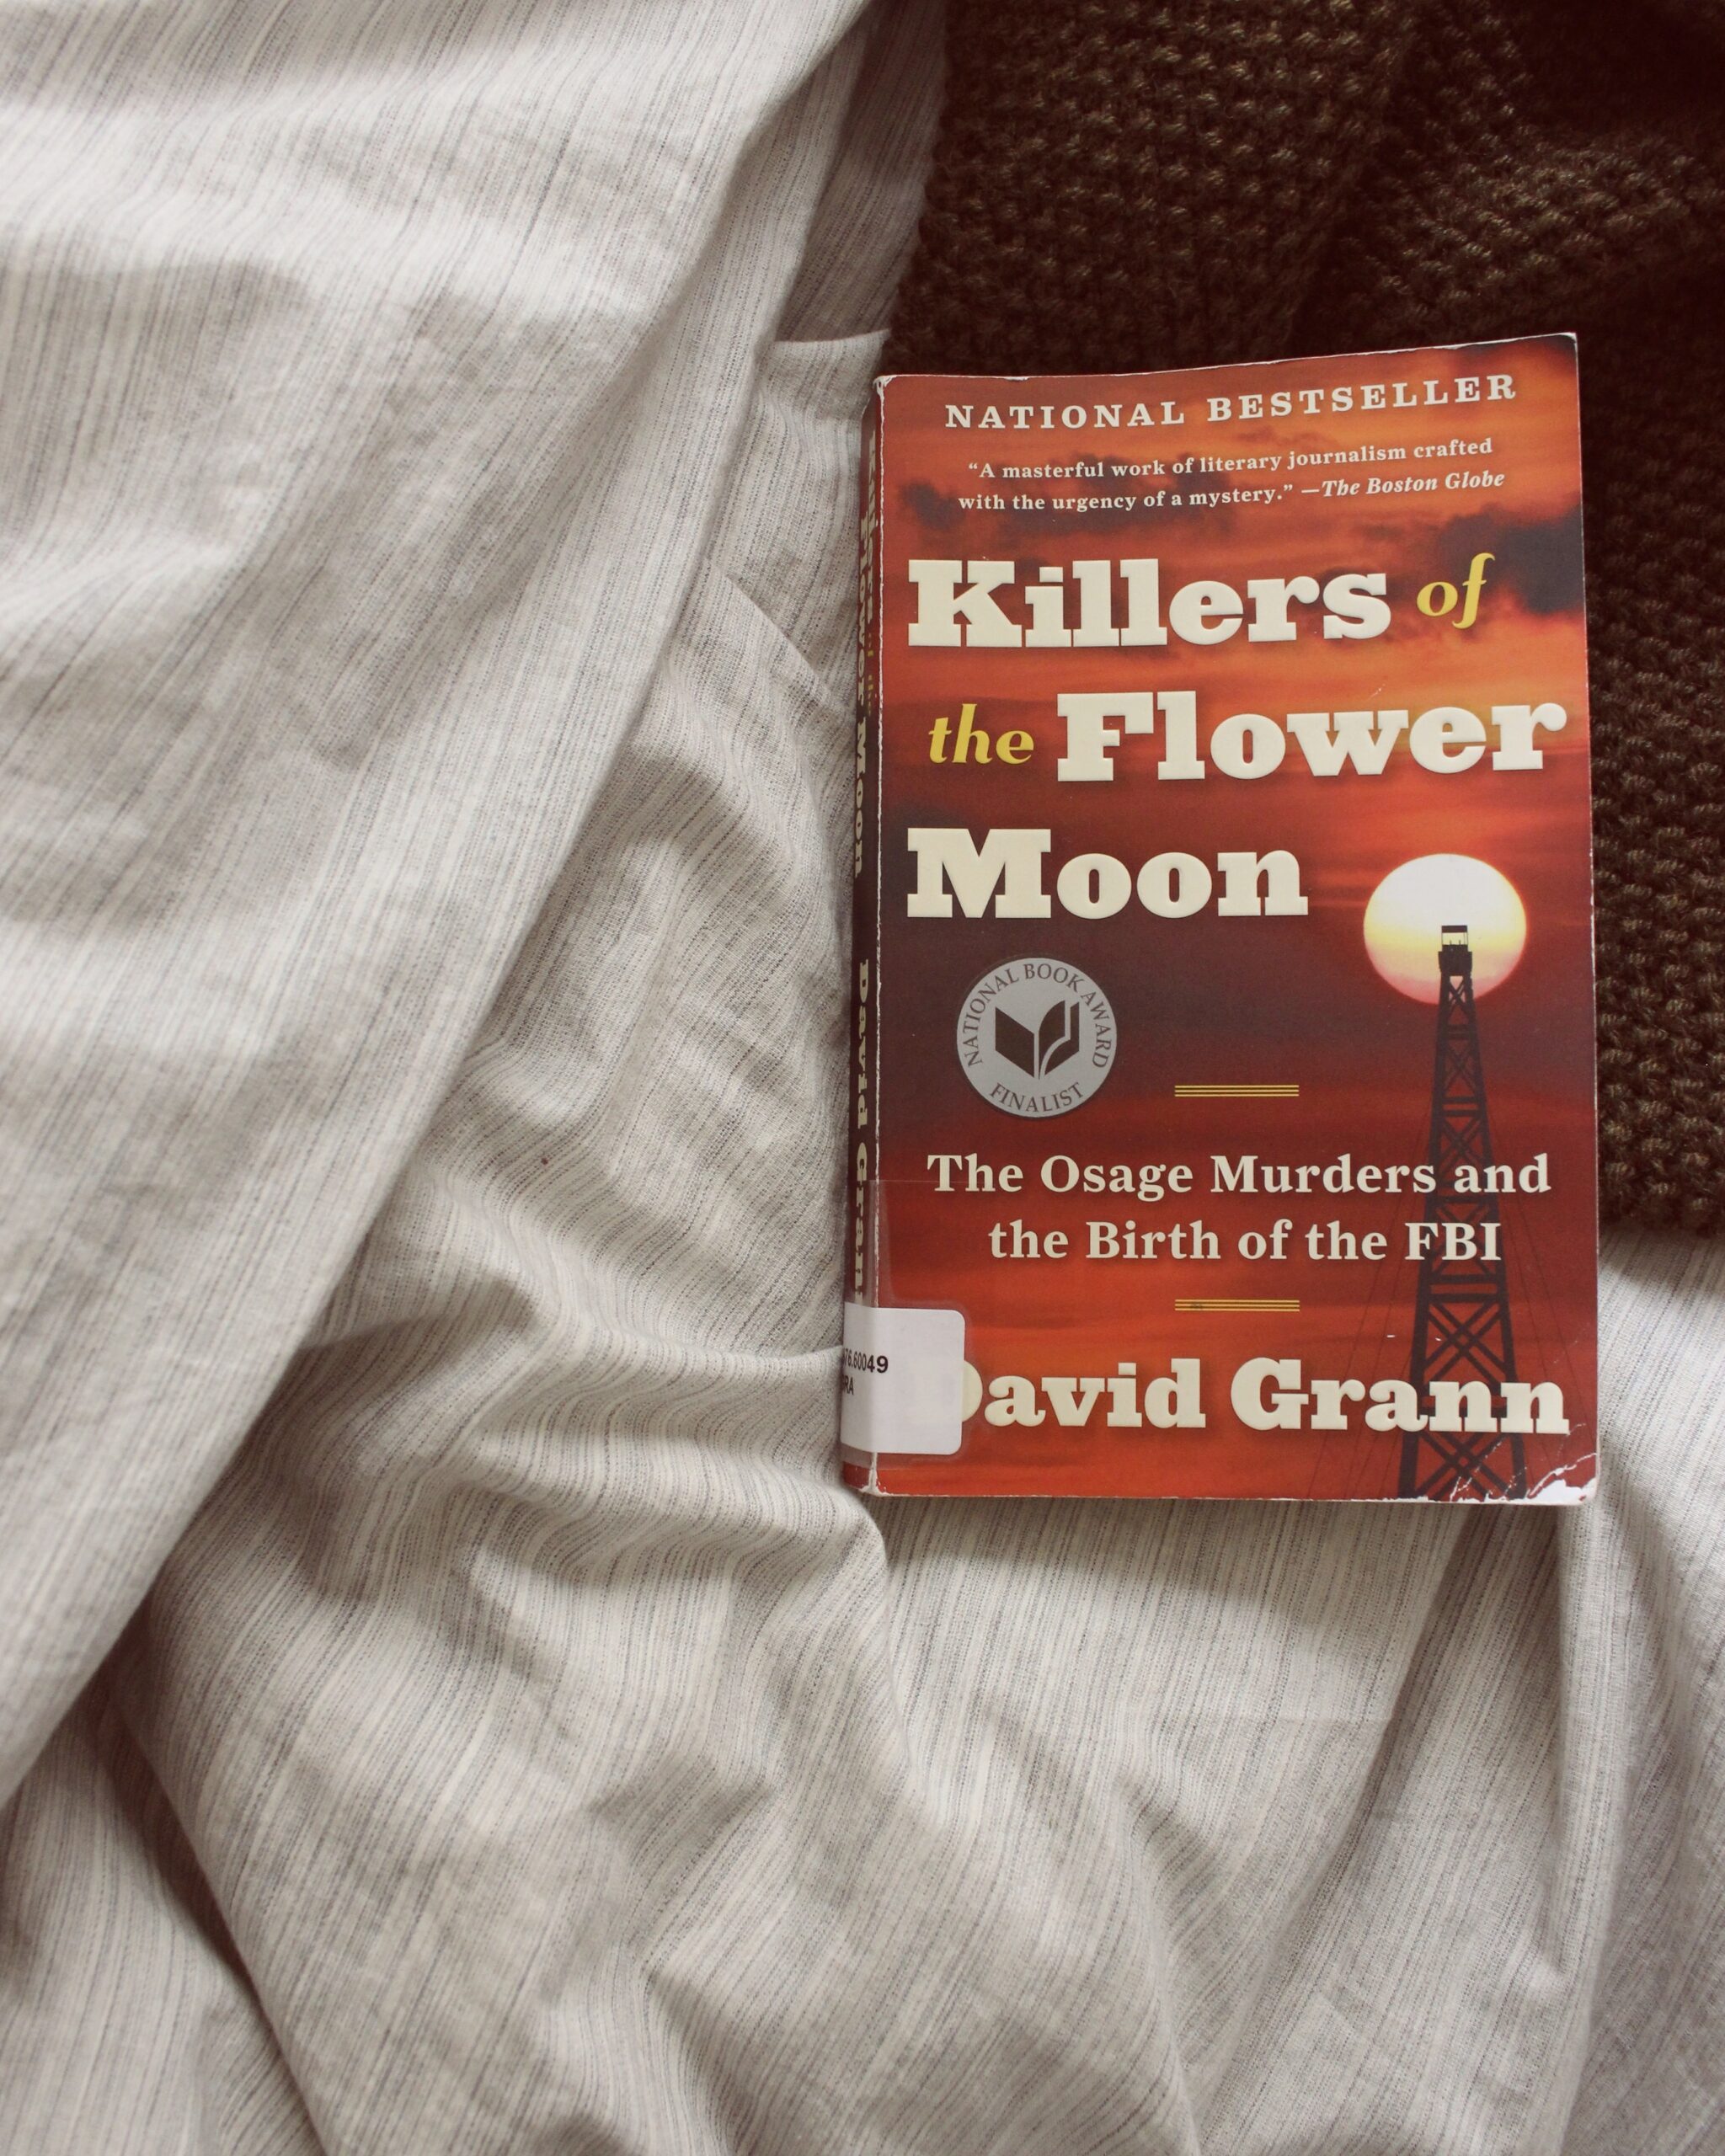 8: Killers of the Flower Moon by David Grann